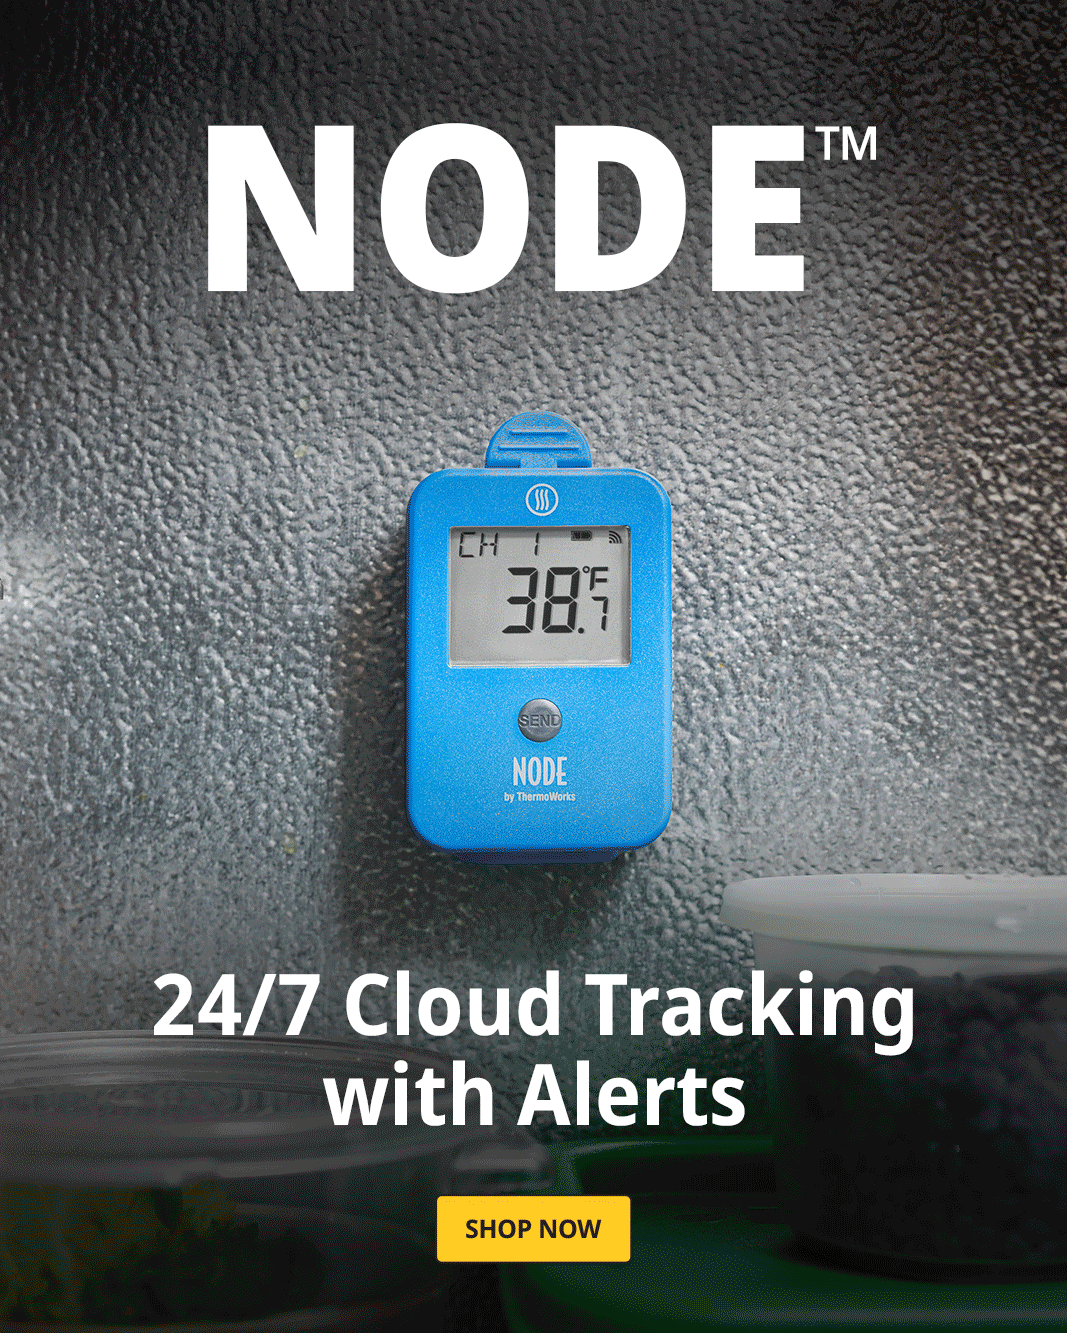 NODE™ Wi-Fi Temperature and Temperature/Humidity Monitors - ThermoWorks